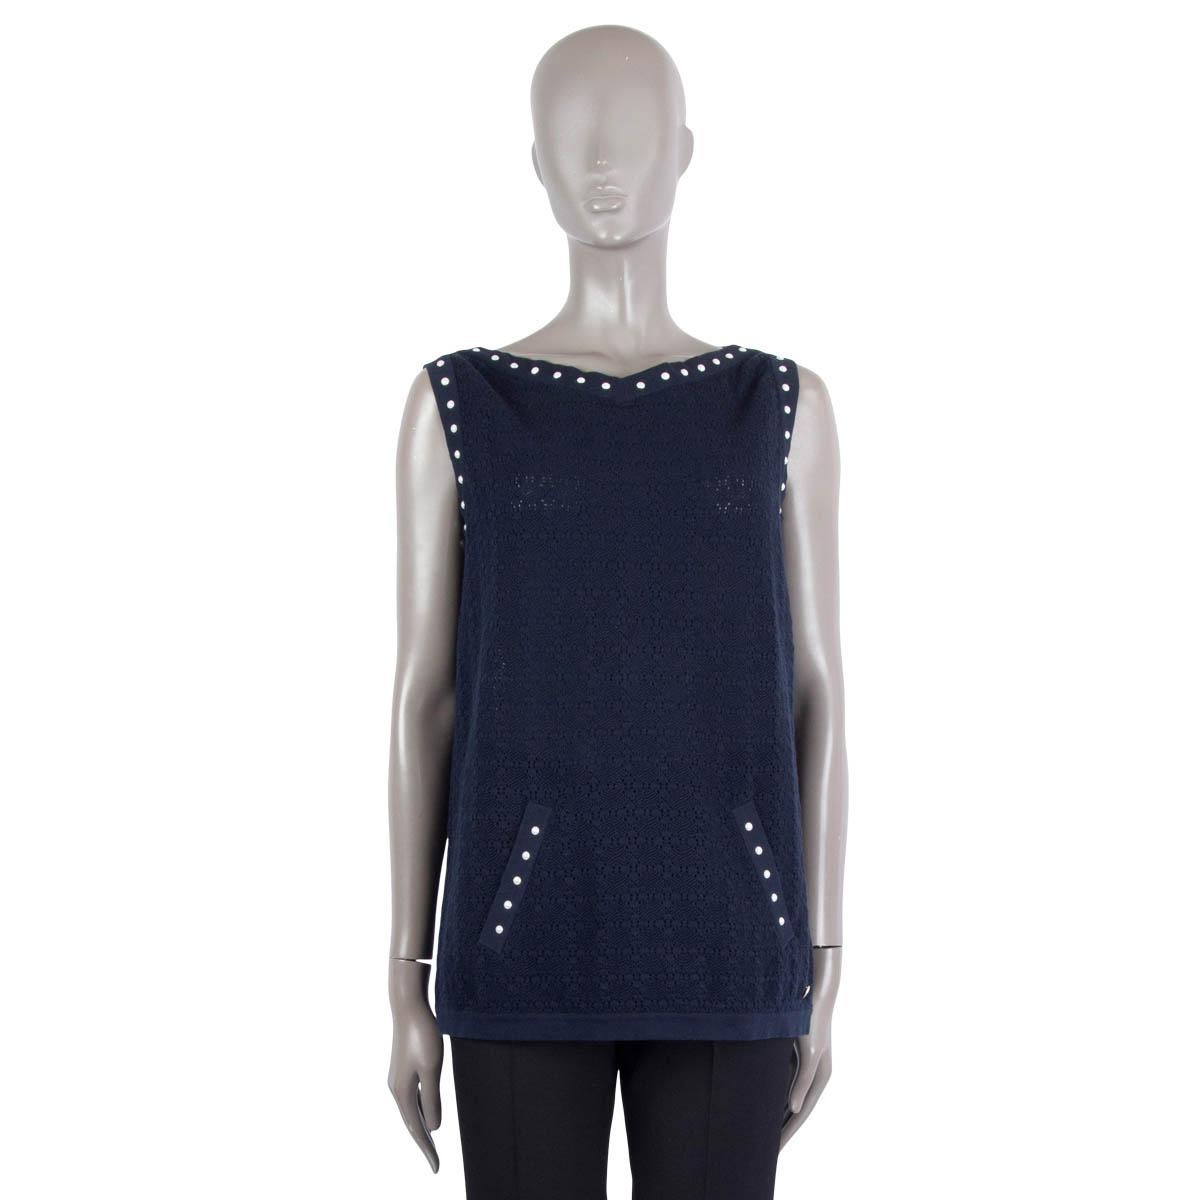 Black CHANEL navy blue cotton 2016 PEARL STUDDED KNIT Shirt 40 M For Sale